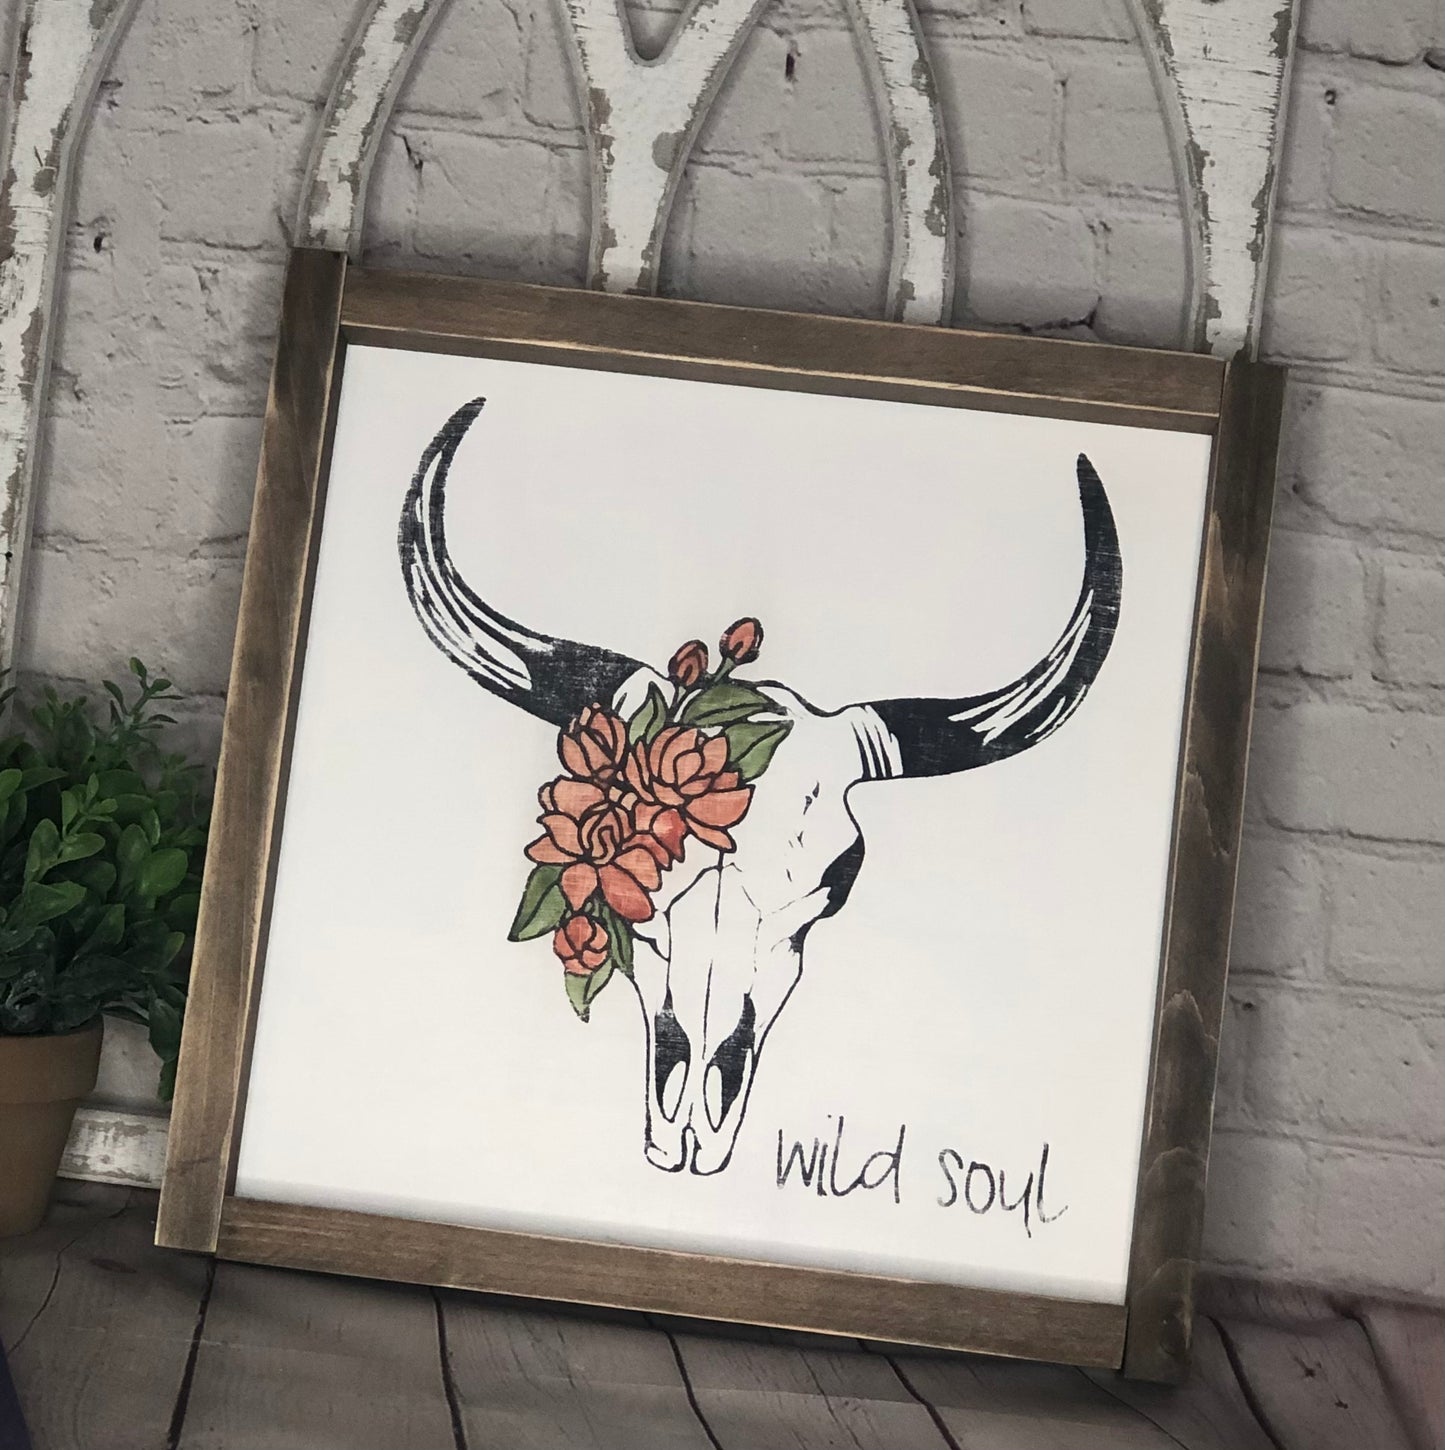 COW SKULL WITH FLOWERS WILD SOUL -FRAMED WOOD SIGN